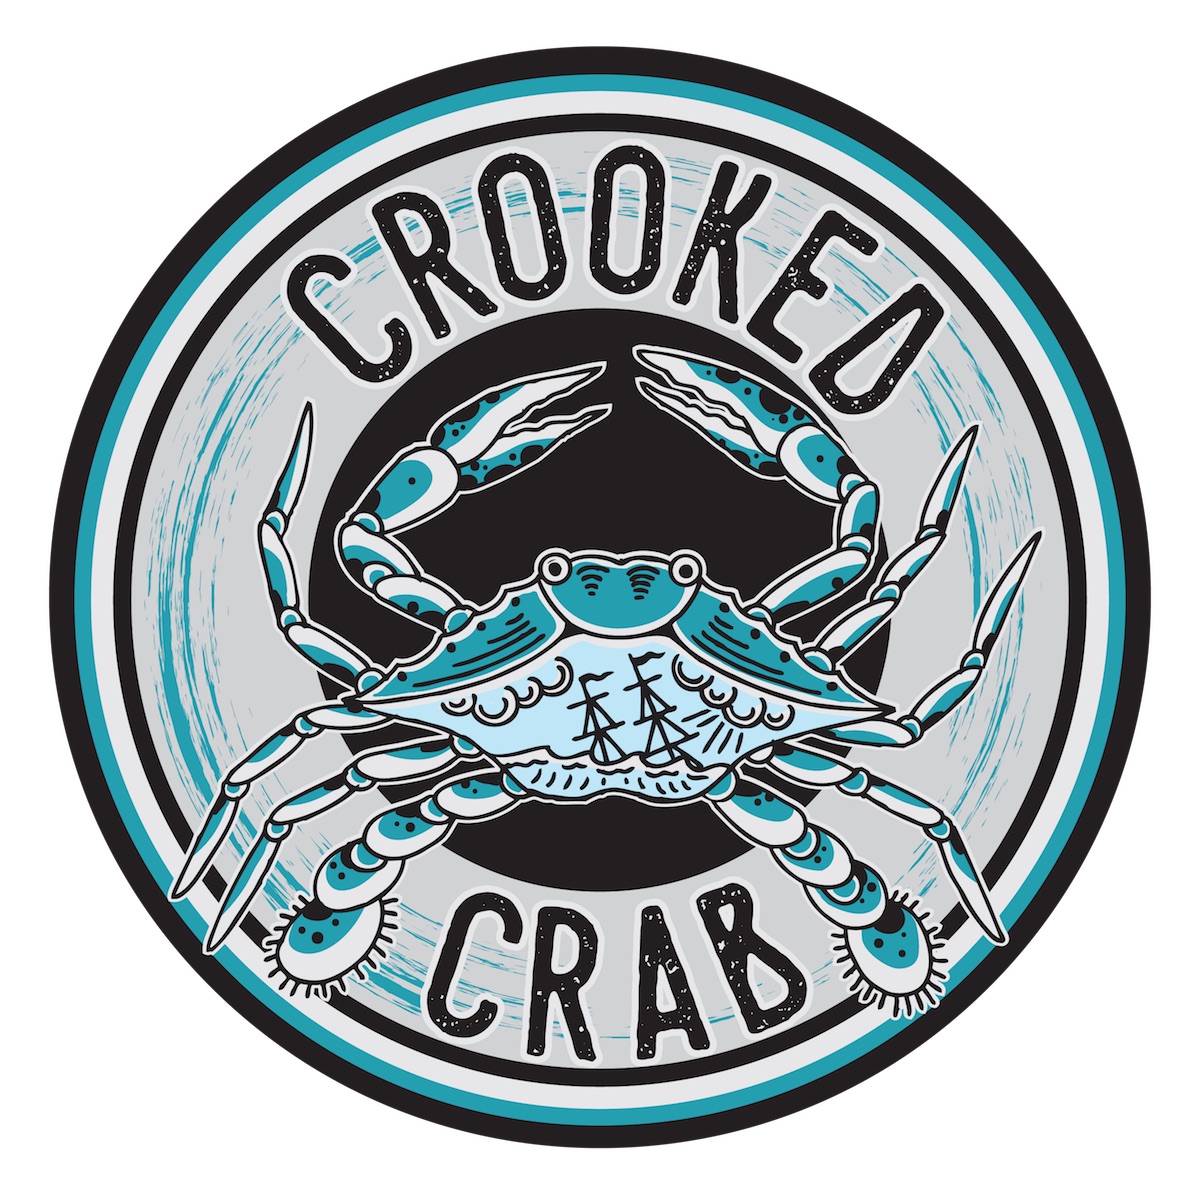 Crooked Crab Brewing